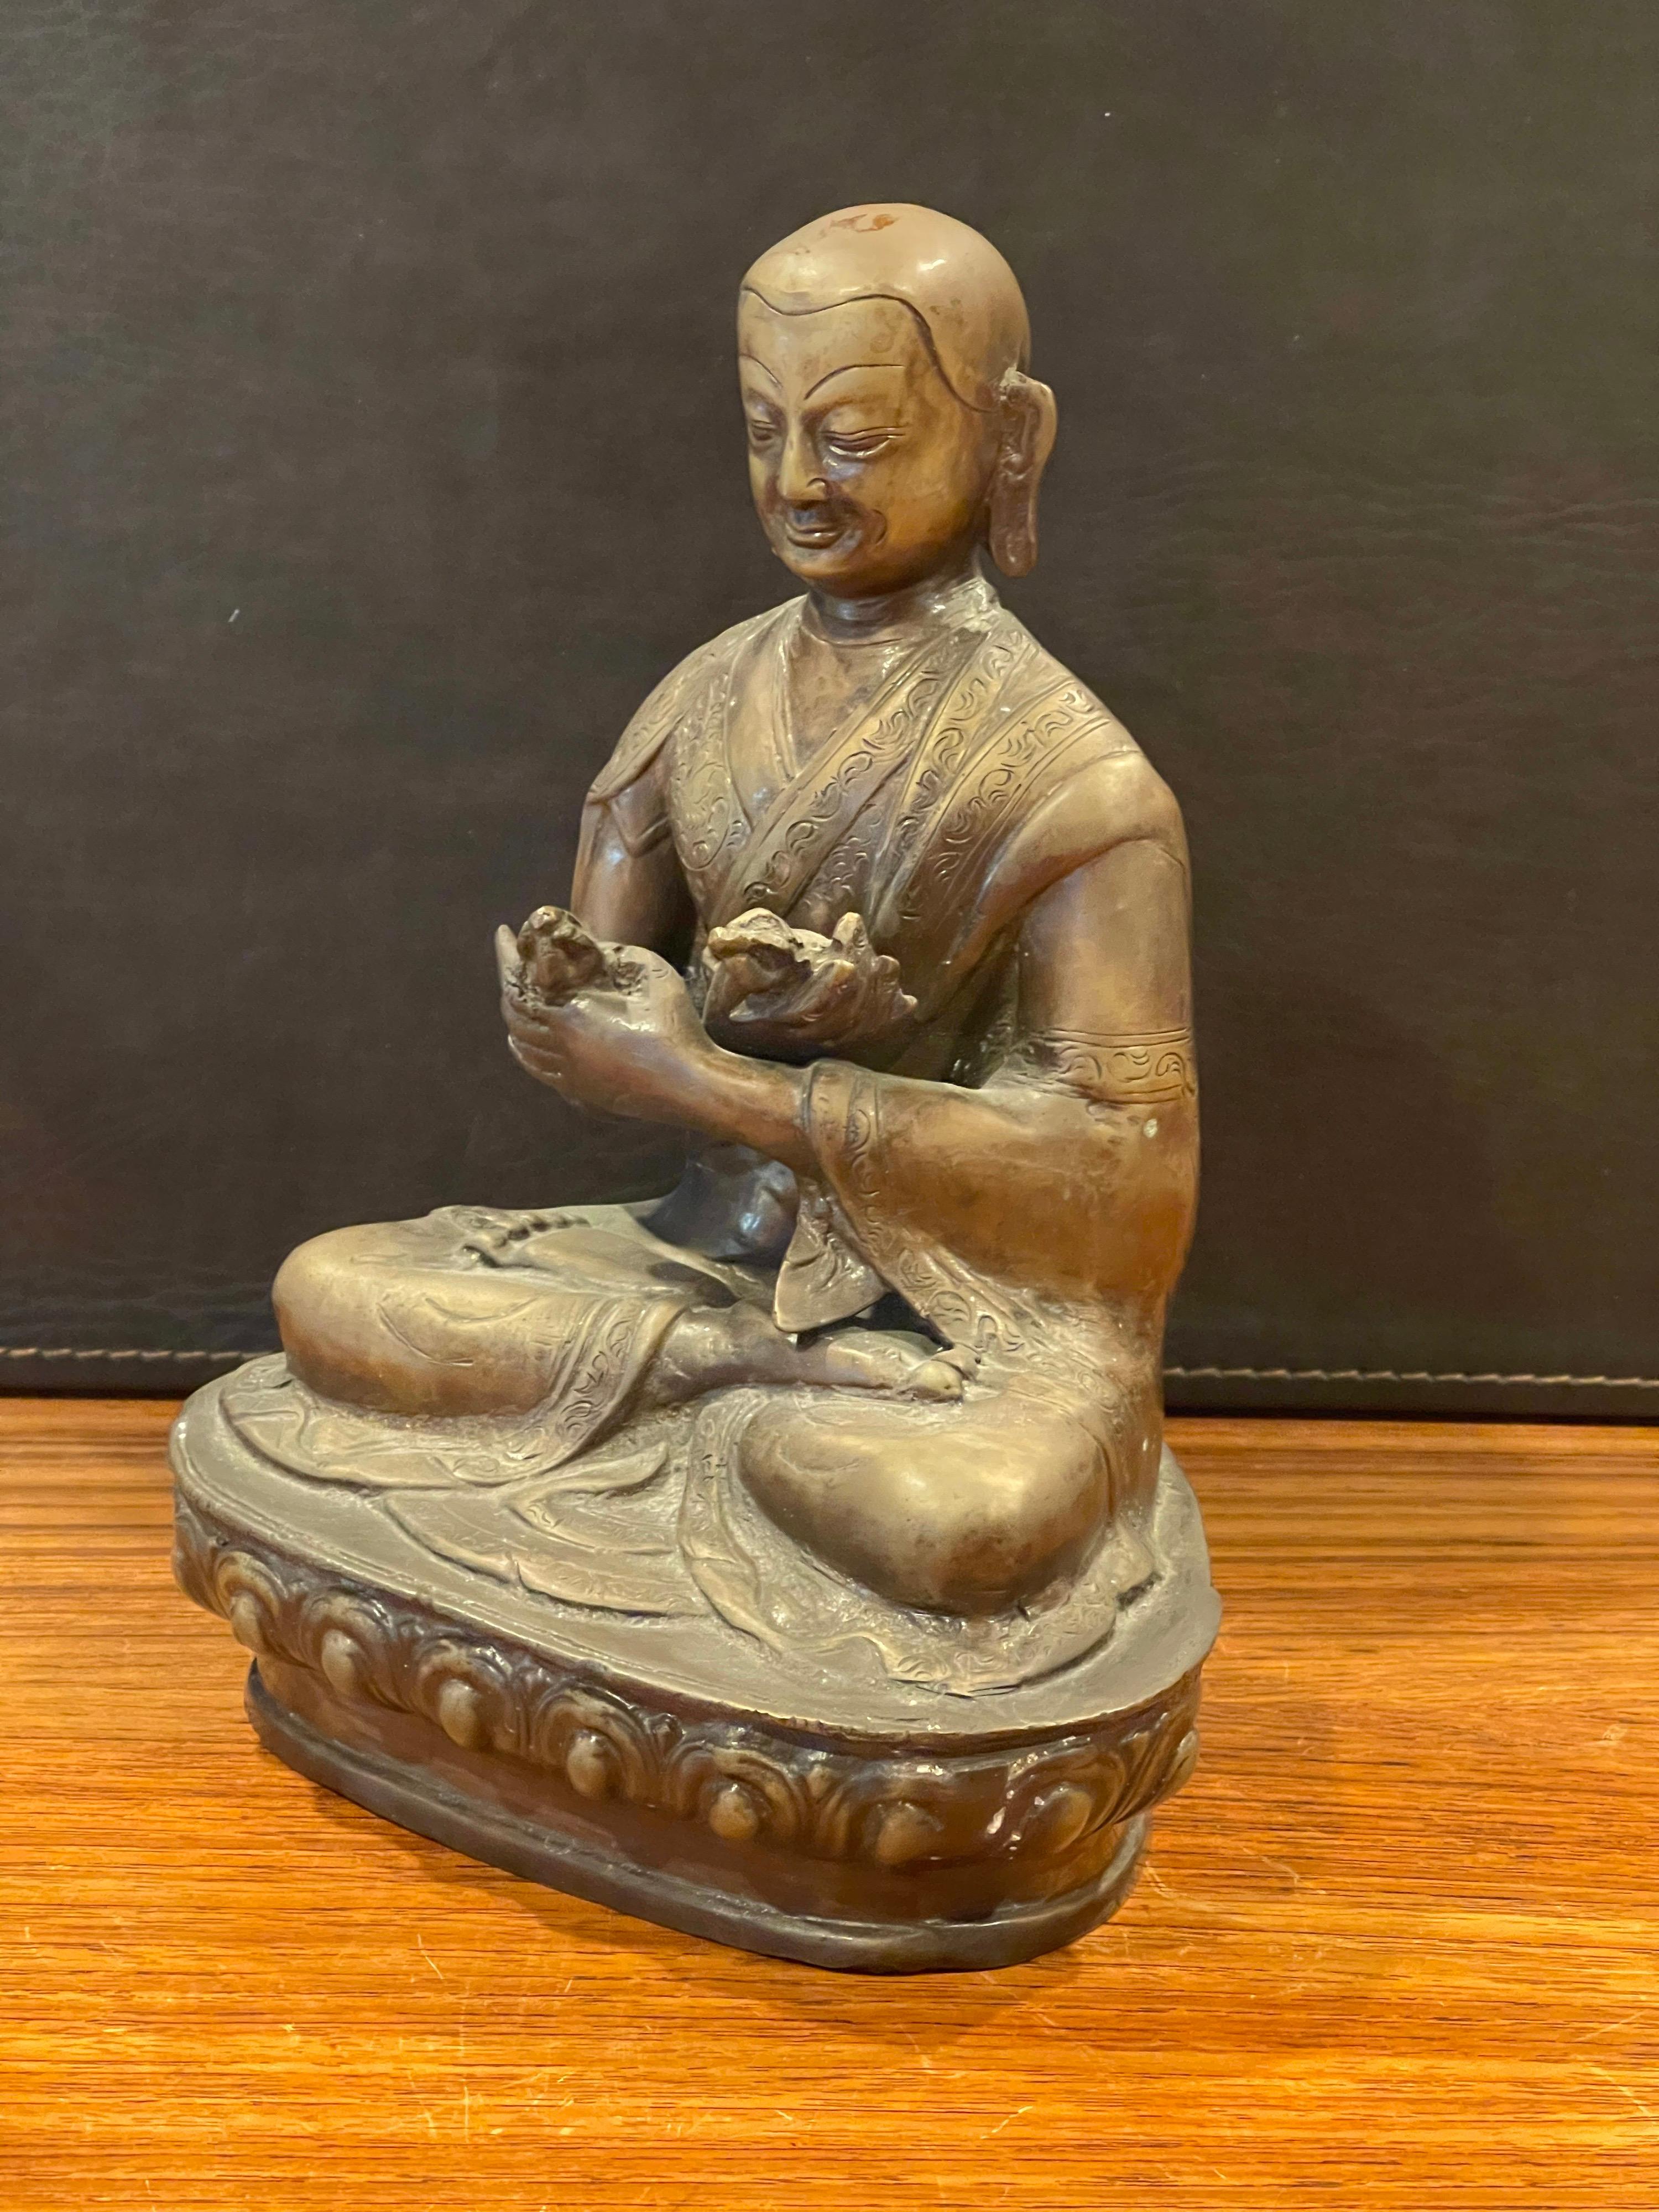 Decorative mid-century bronze Buddha circa 1960s. The piece is in very good vintage condition and measures: 7